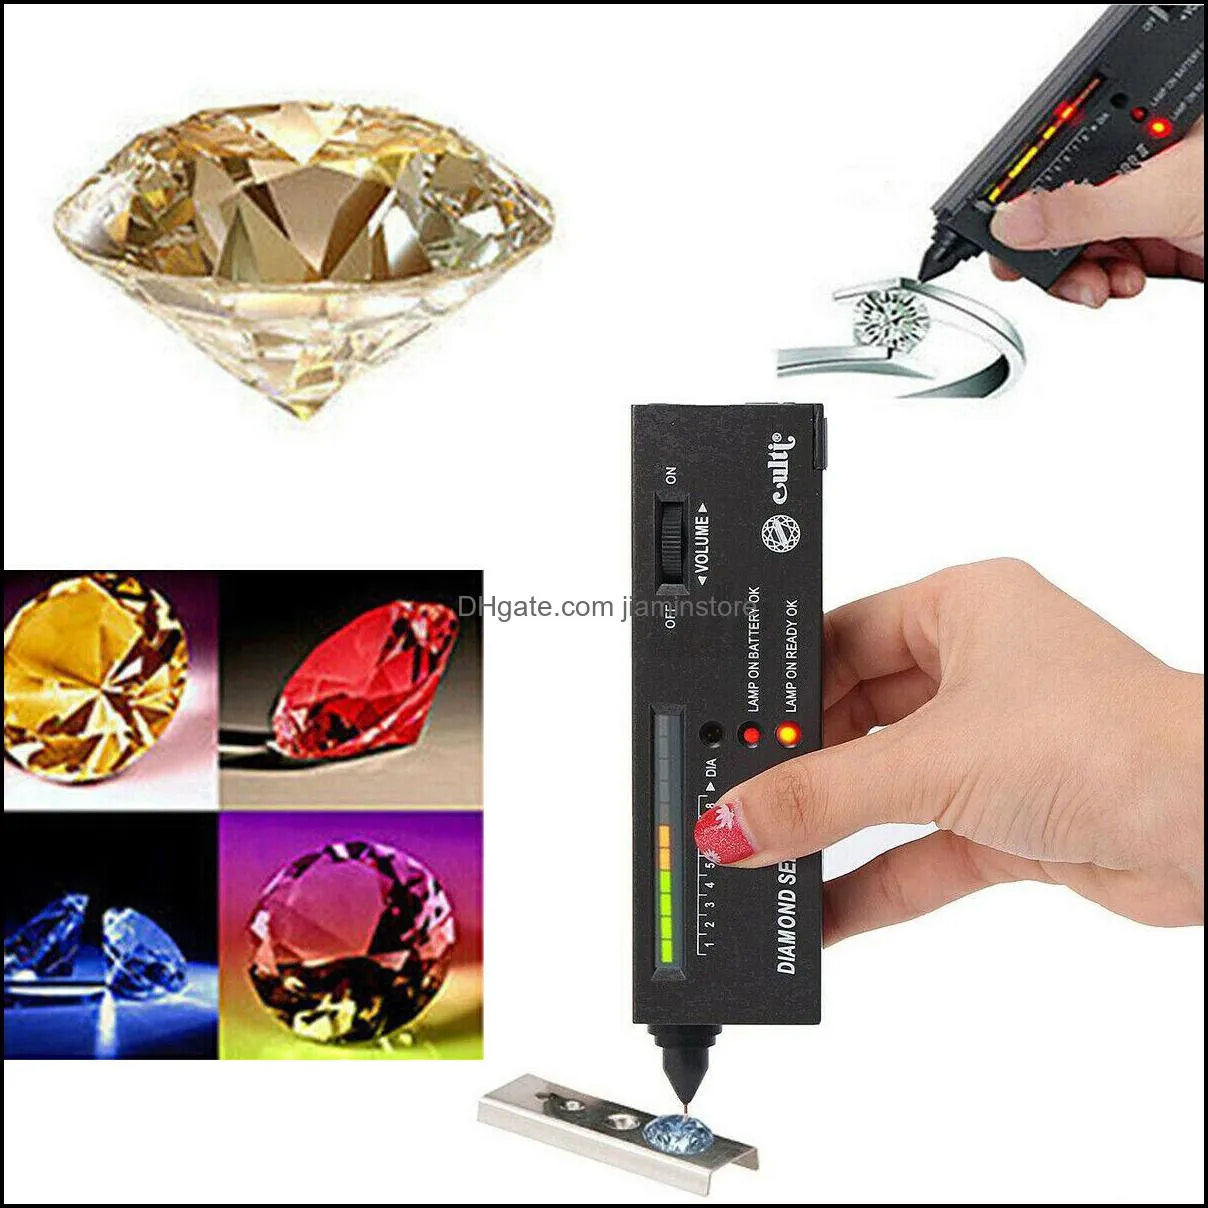 Testers & Measurements Jewelry Tools Equipment Portable High Accuracy Professional Diamond Tester Gemstone Selector Ll Jeweler Tool Kit Led